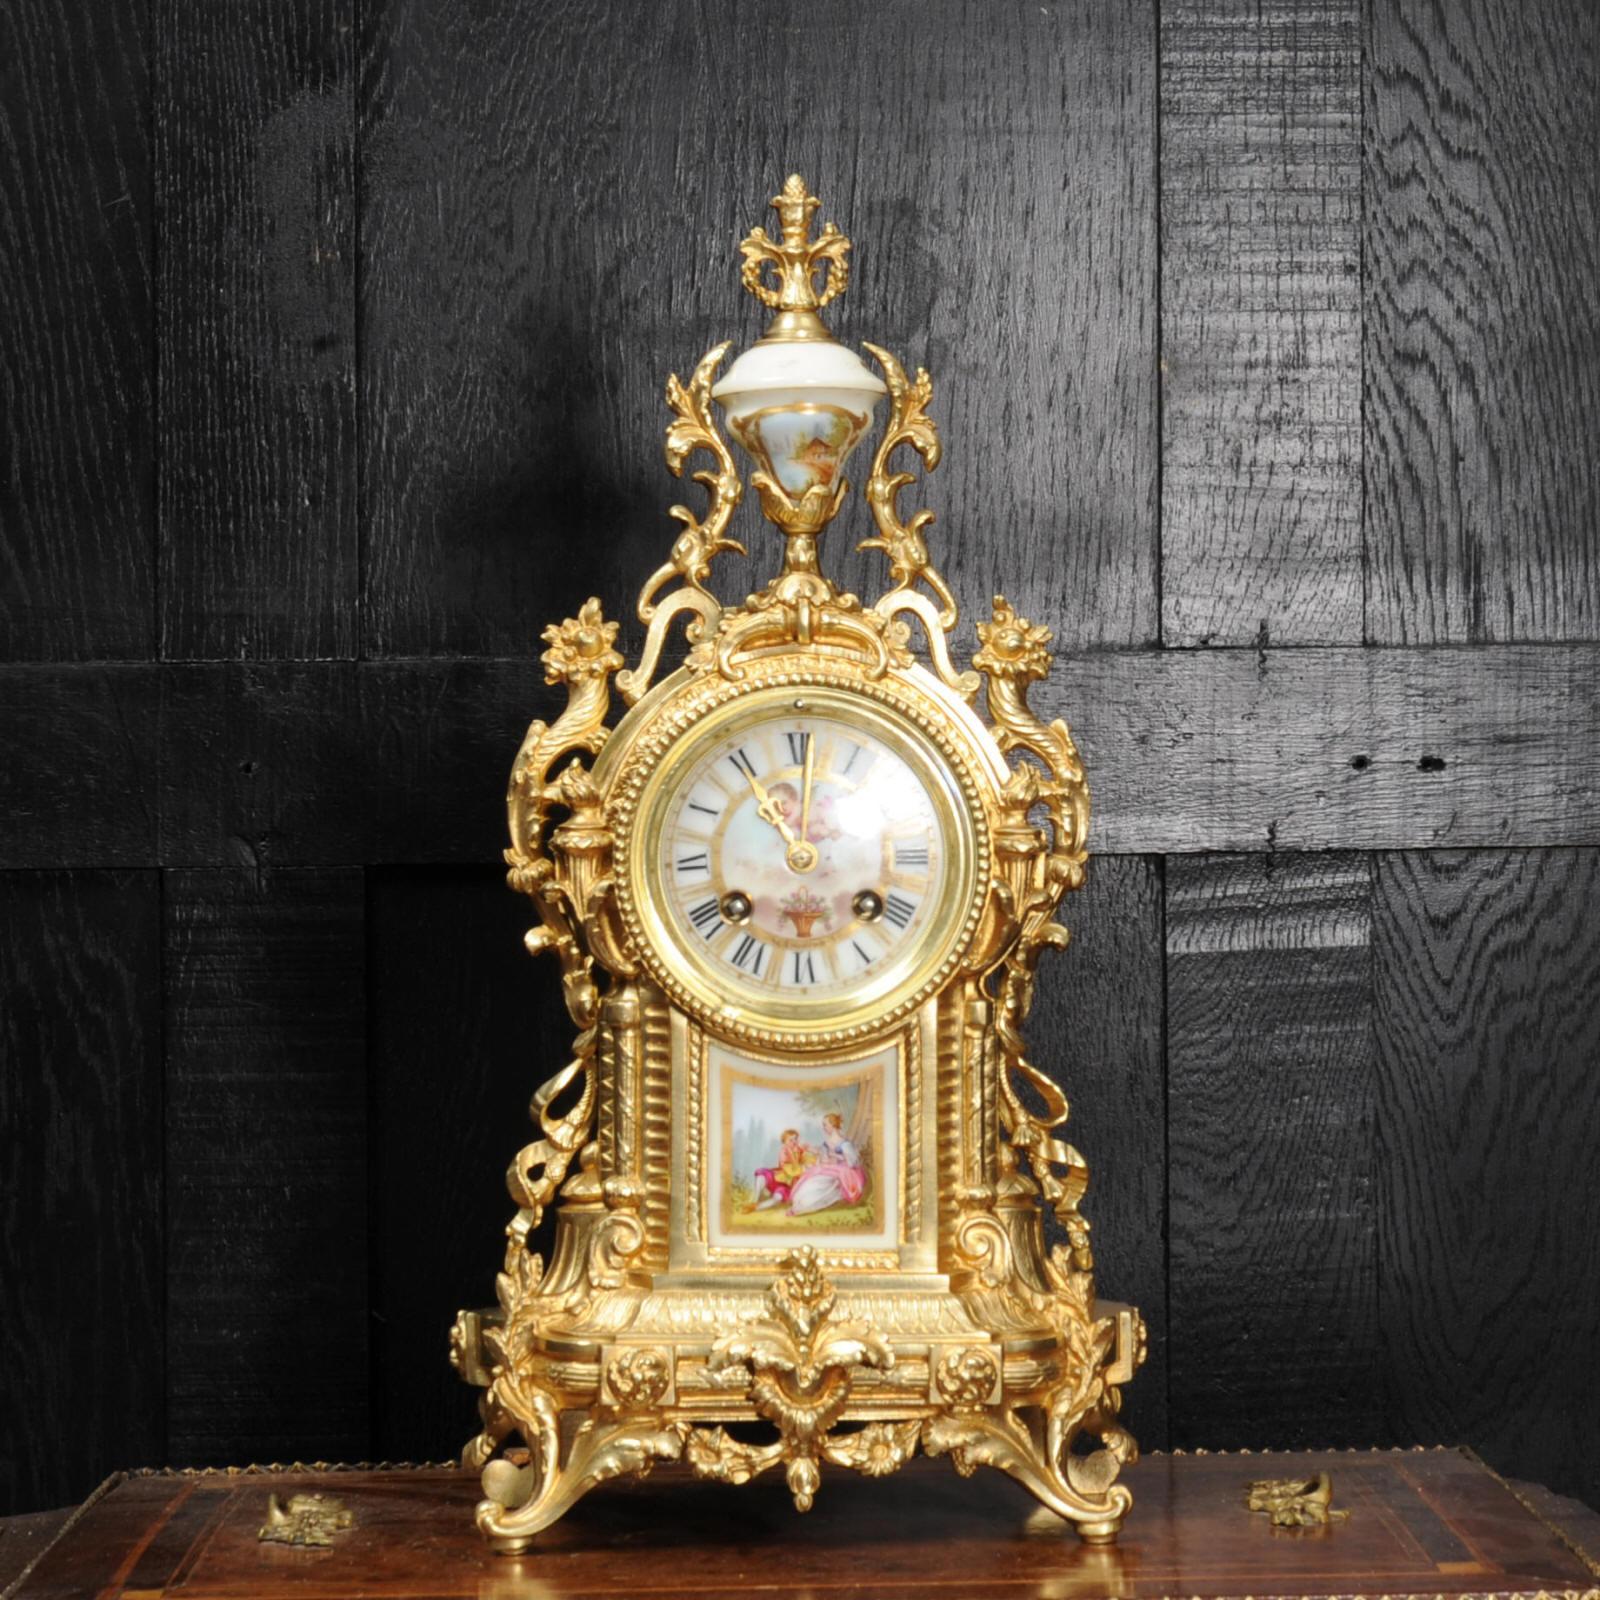 A beautiful antique French ormolu (gilt bronze) clock with exquisitely decorated Sèvres style porcelain panel, urn and dial. The movement is by the distinguished clockmaker Samuel Marti and dates from circa 1870. The style is Louis XVI, decorated